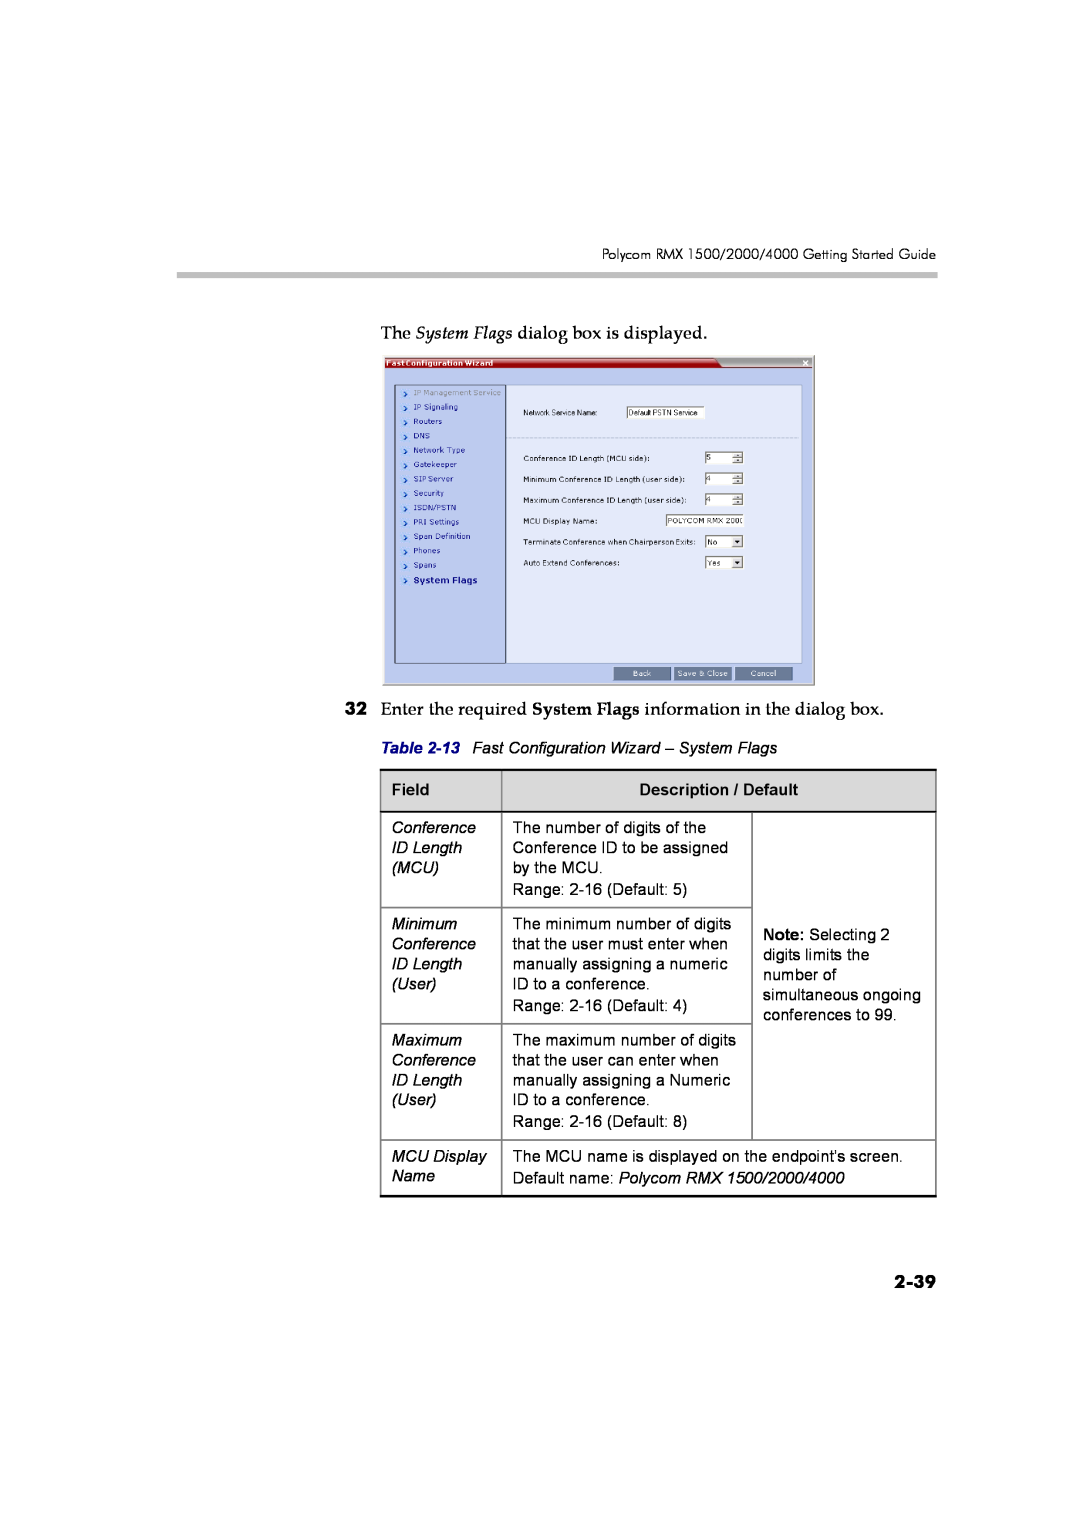 Polycom DOC2560B manual 2-39, The System Flags dialog box is displayed, Field, Description / Default 